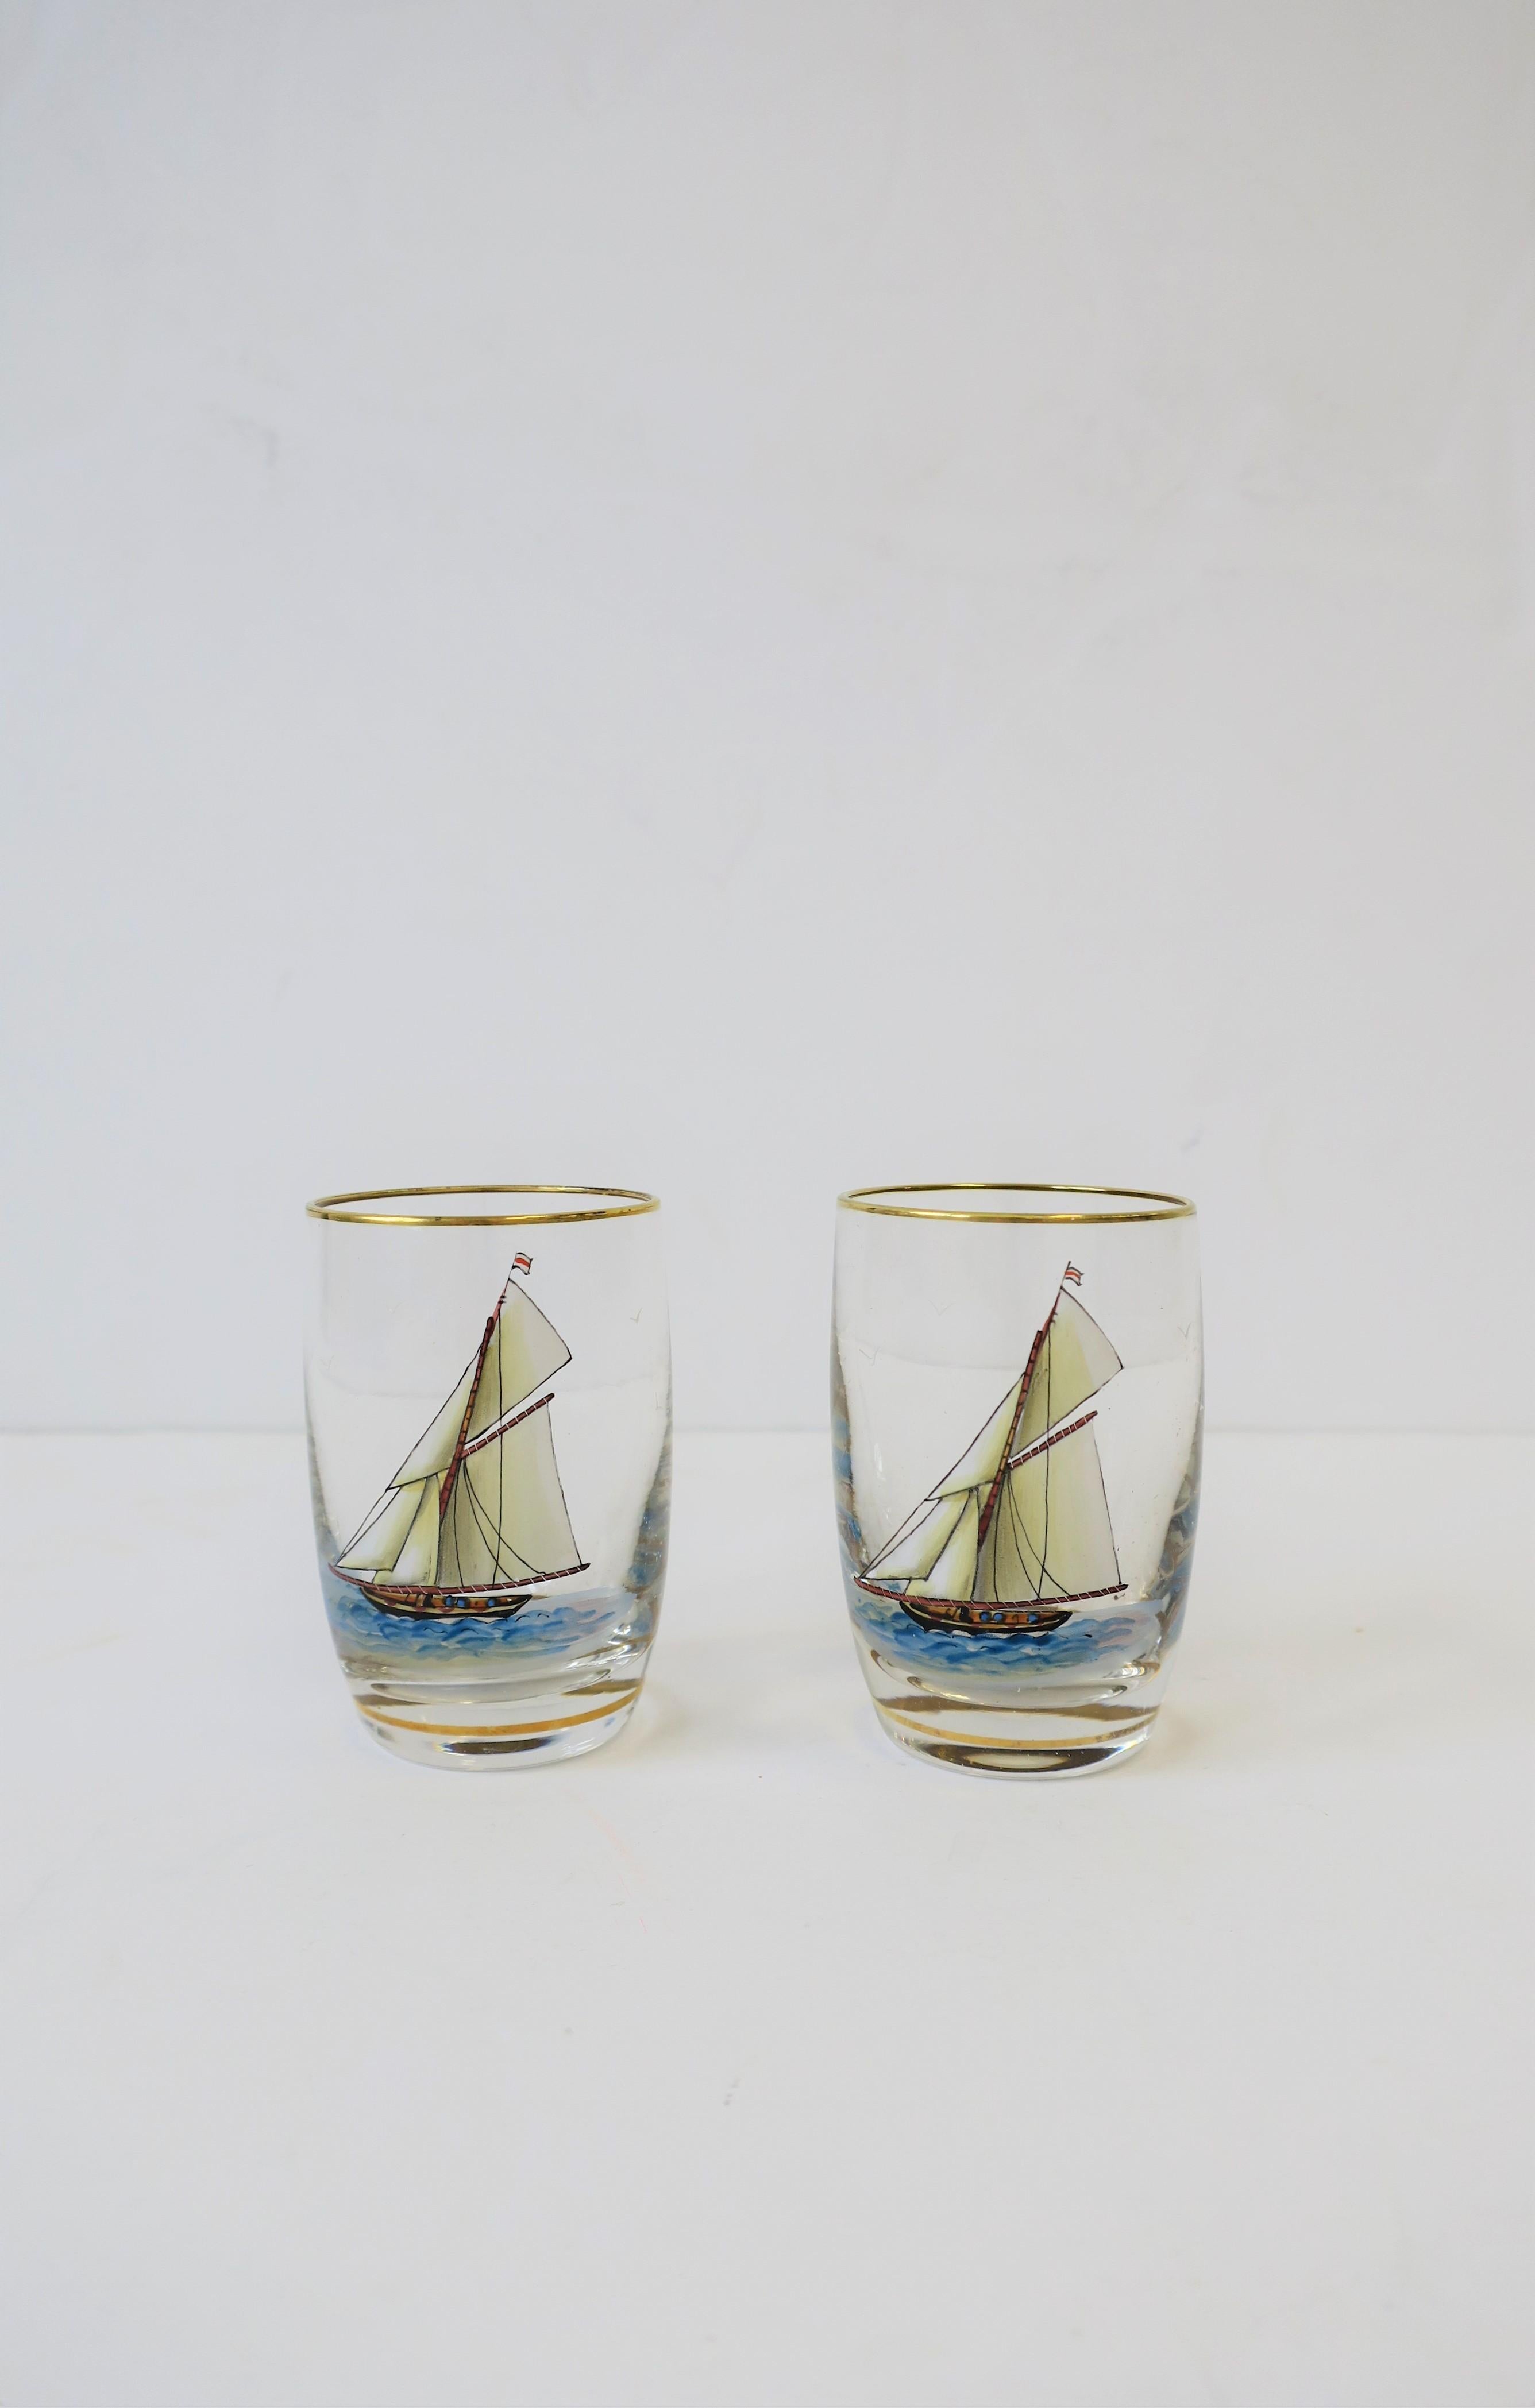 A beautiful set of two crystal aperitif or shot glasses with mini nautical art scene of large sailboat, ocean sea, and seagull birds. Glass rim and base have gold detail. Excellent condition. 

Each measure: 2.50 in. H.